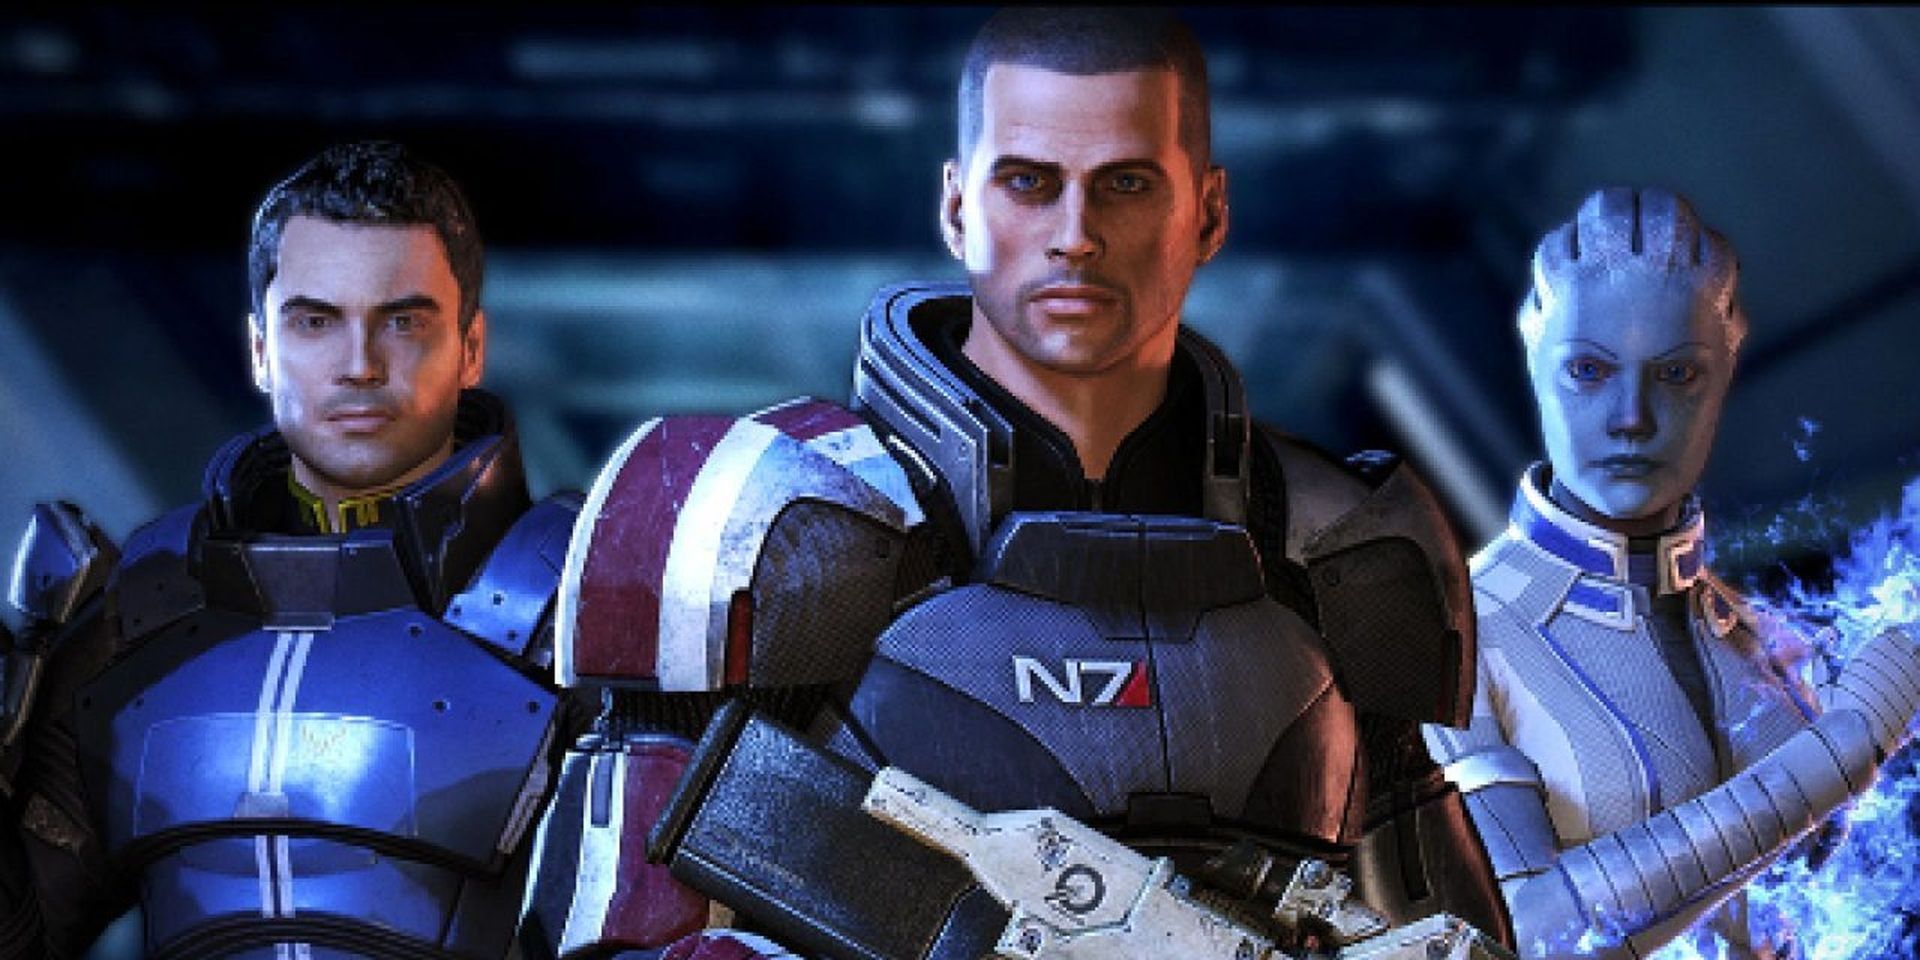 download mass effect 2 remastered for free